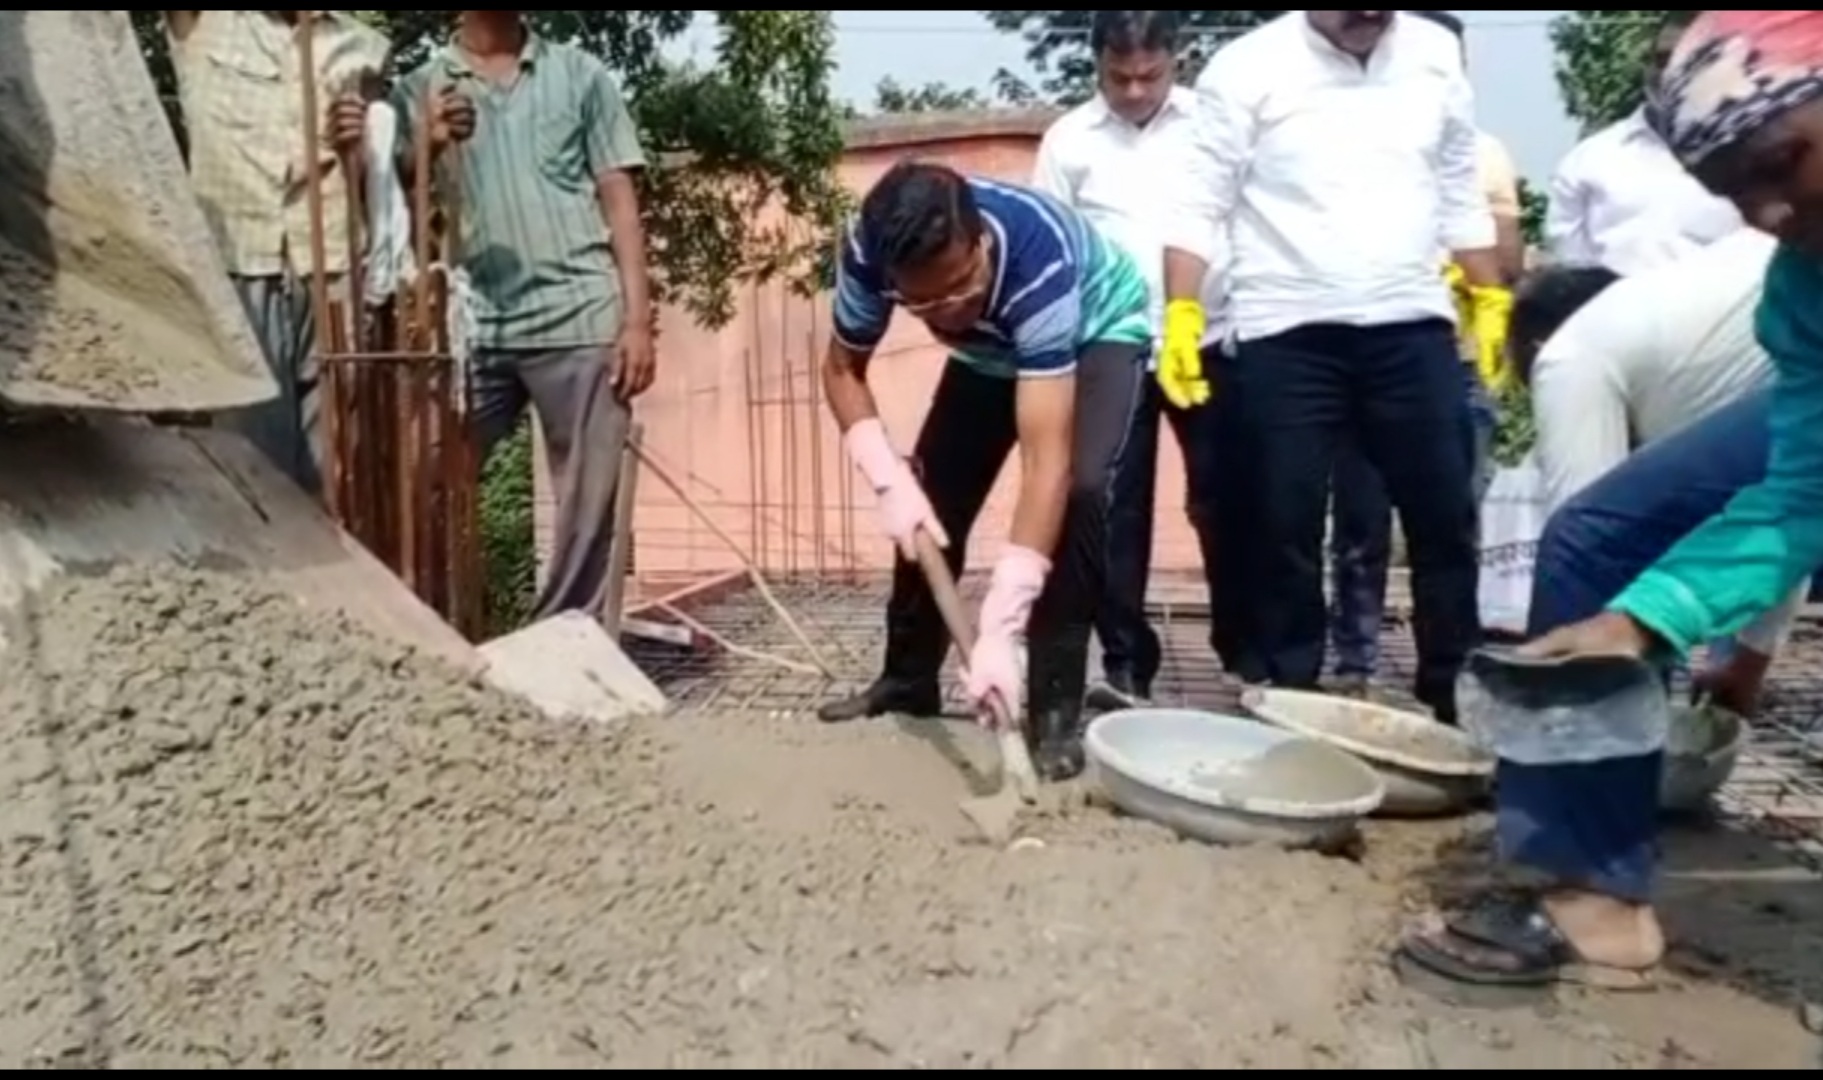 Congress state president Mohan Markam did Shramdaan in building under construction in raipur